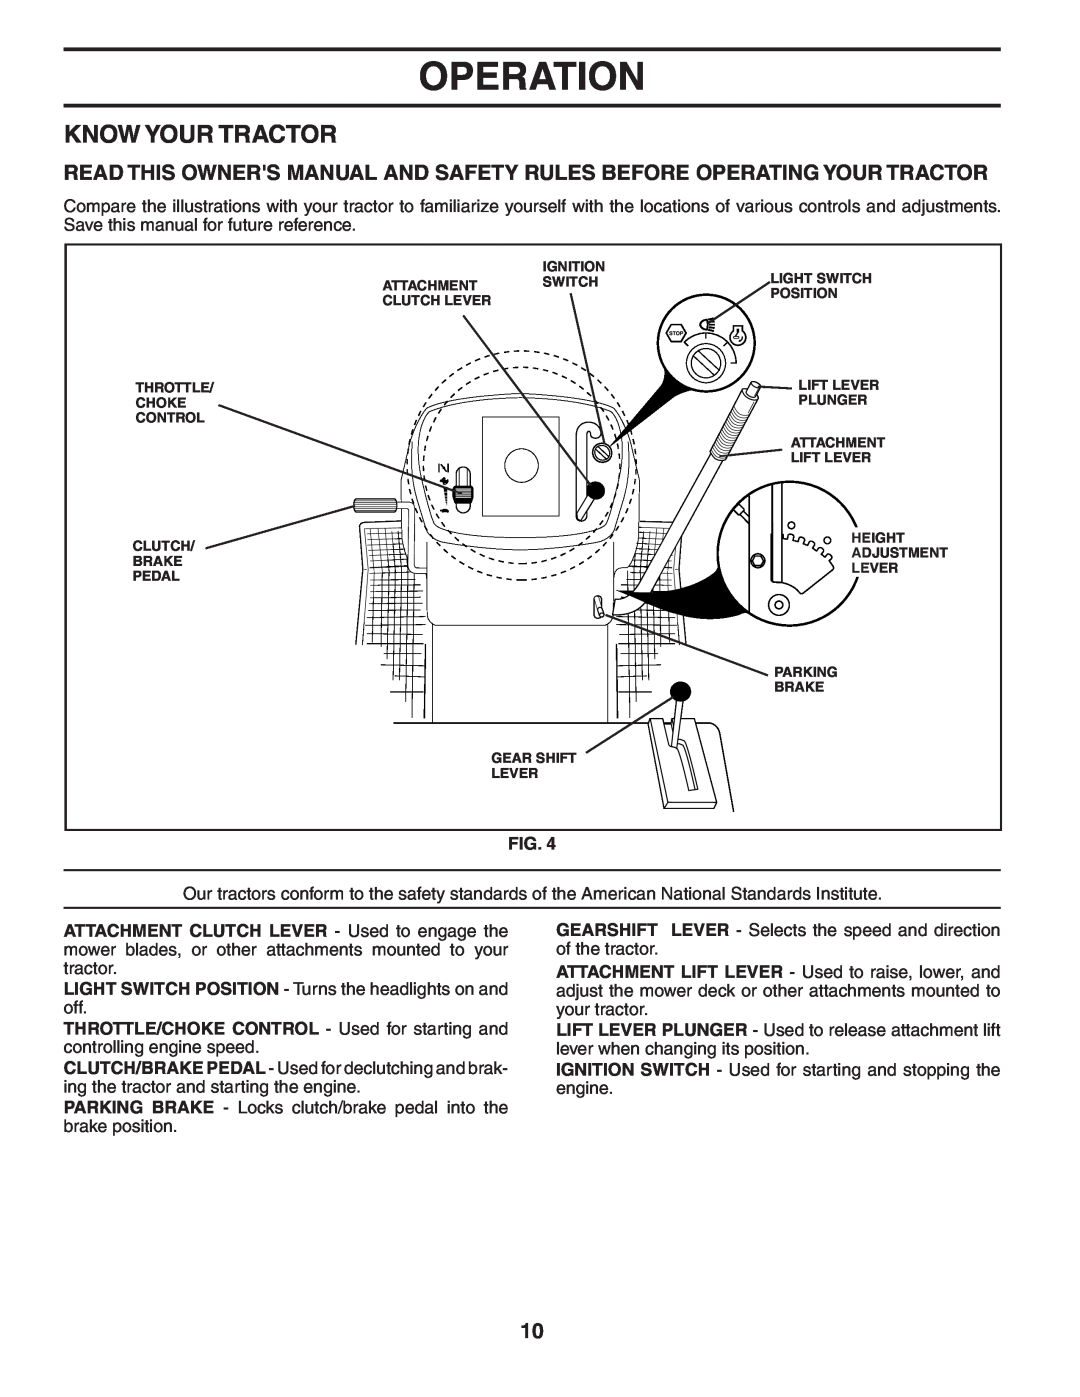 Weed Eater WET2242STD manual Know Your Tractor, Operation 